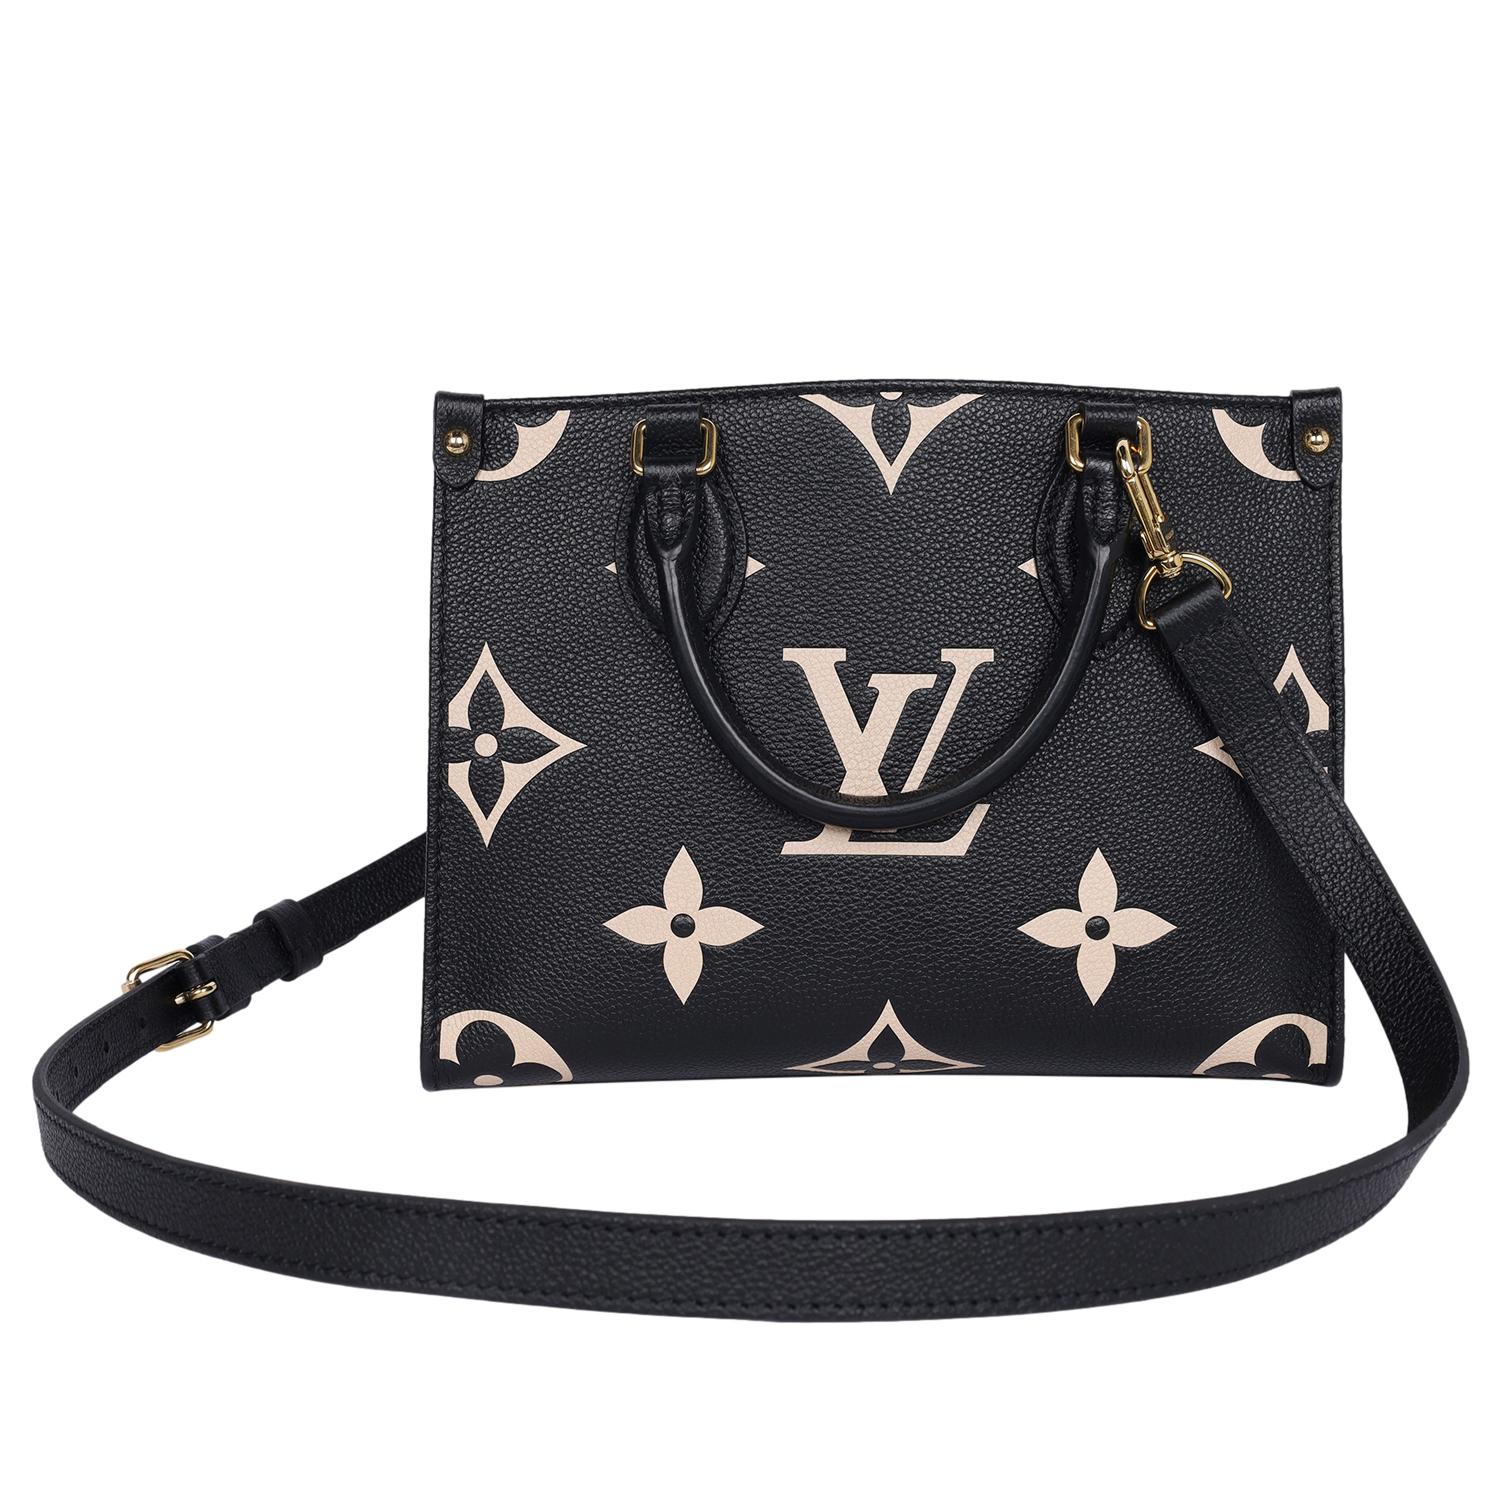 Authentic Louis Vuitton limited edition giant logo monogram Onthego PM in black and beige. Features monogram giant coated canvas, brass hardware, dual rolled top handles, flat shoulder crossbody strap that is adjustable, microfiber lining, three